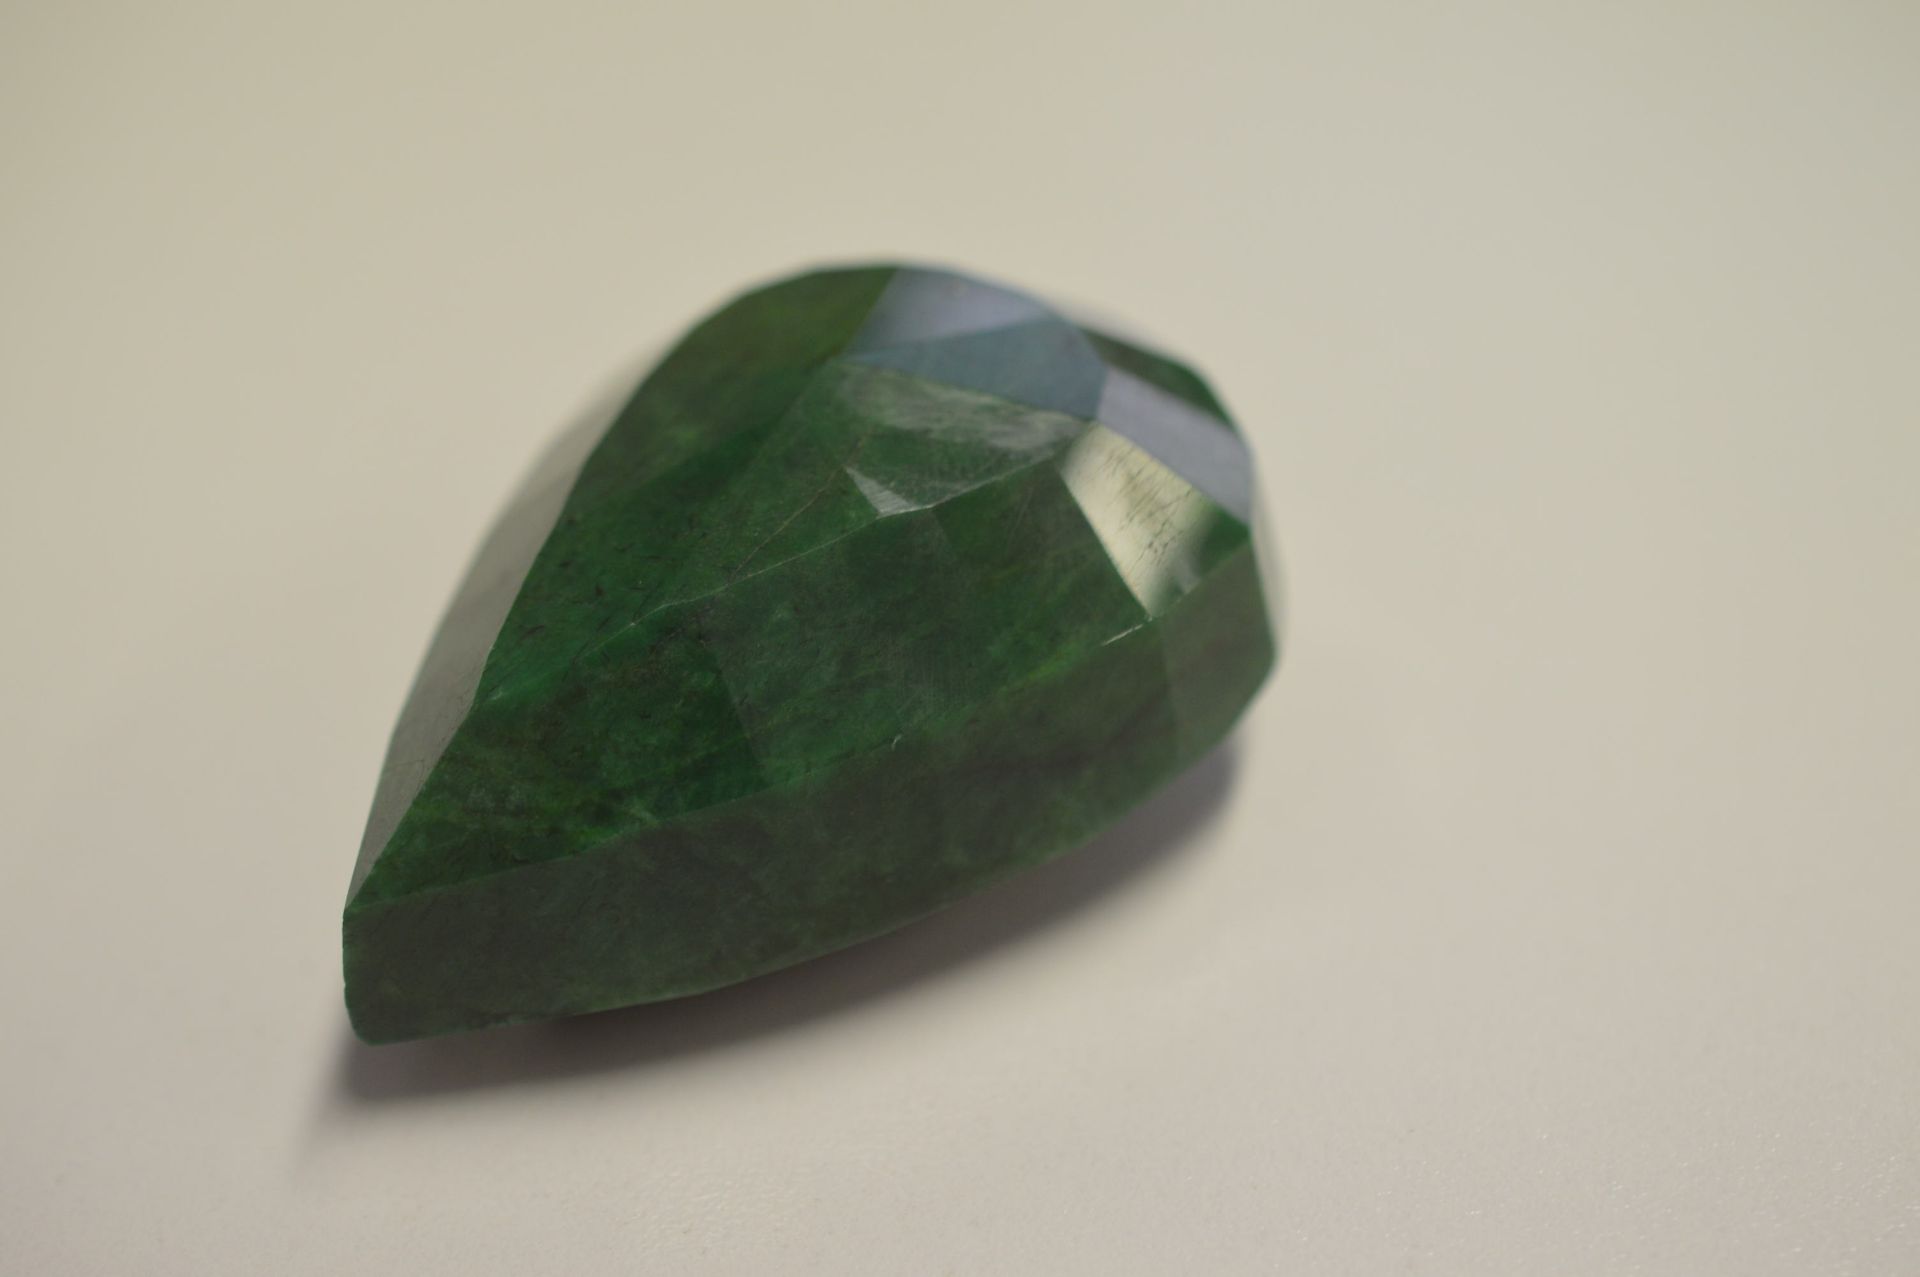 512 CARAT OVAL SHAPED GREEN NATURAL EMERALD - Image 2 of 4